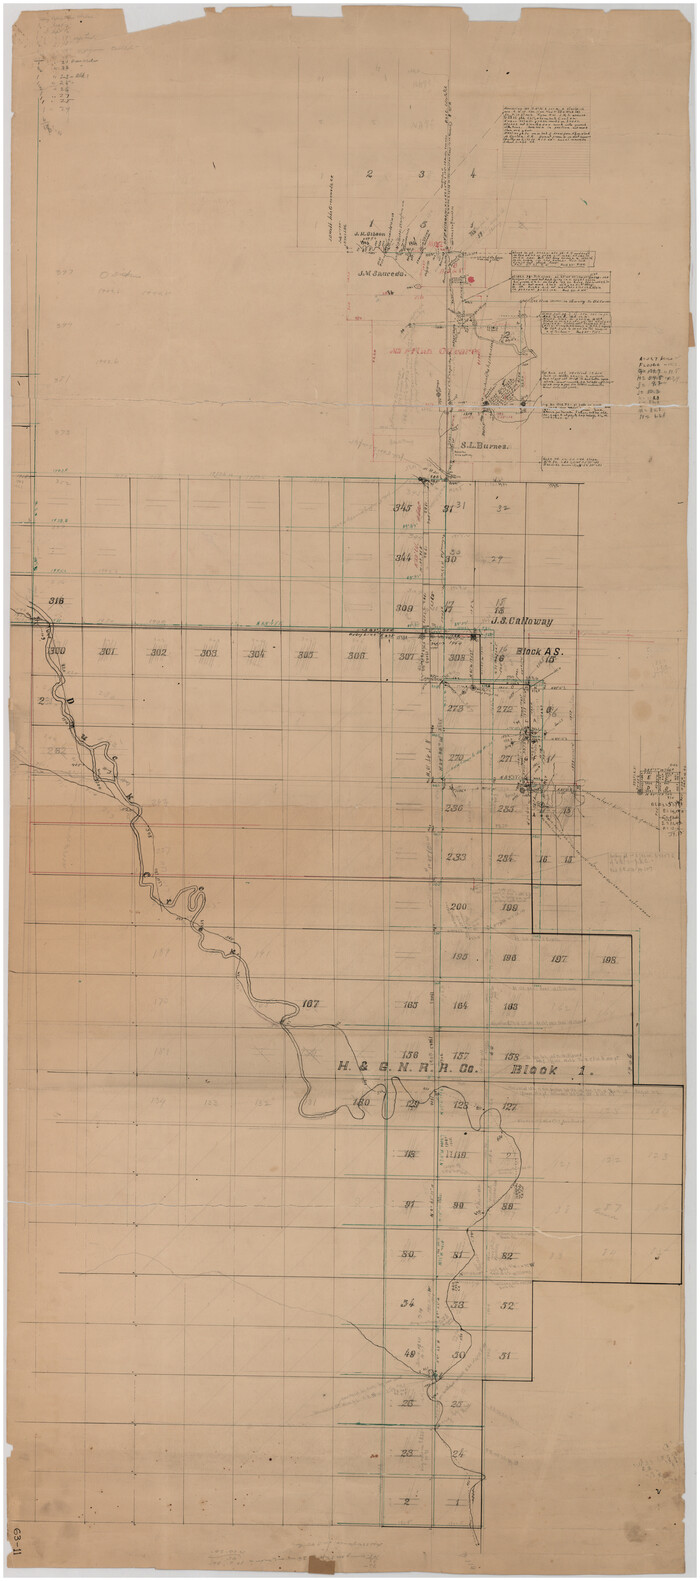 89634, [Sketch showing H. & G. N. Blk. 1], Twichell Survey Records